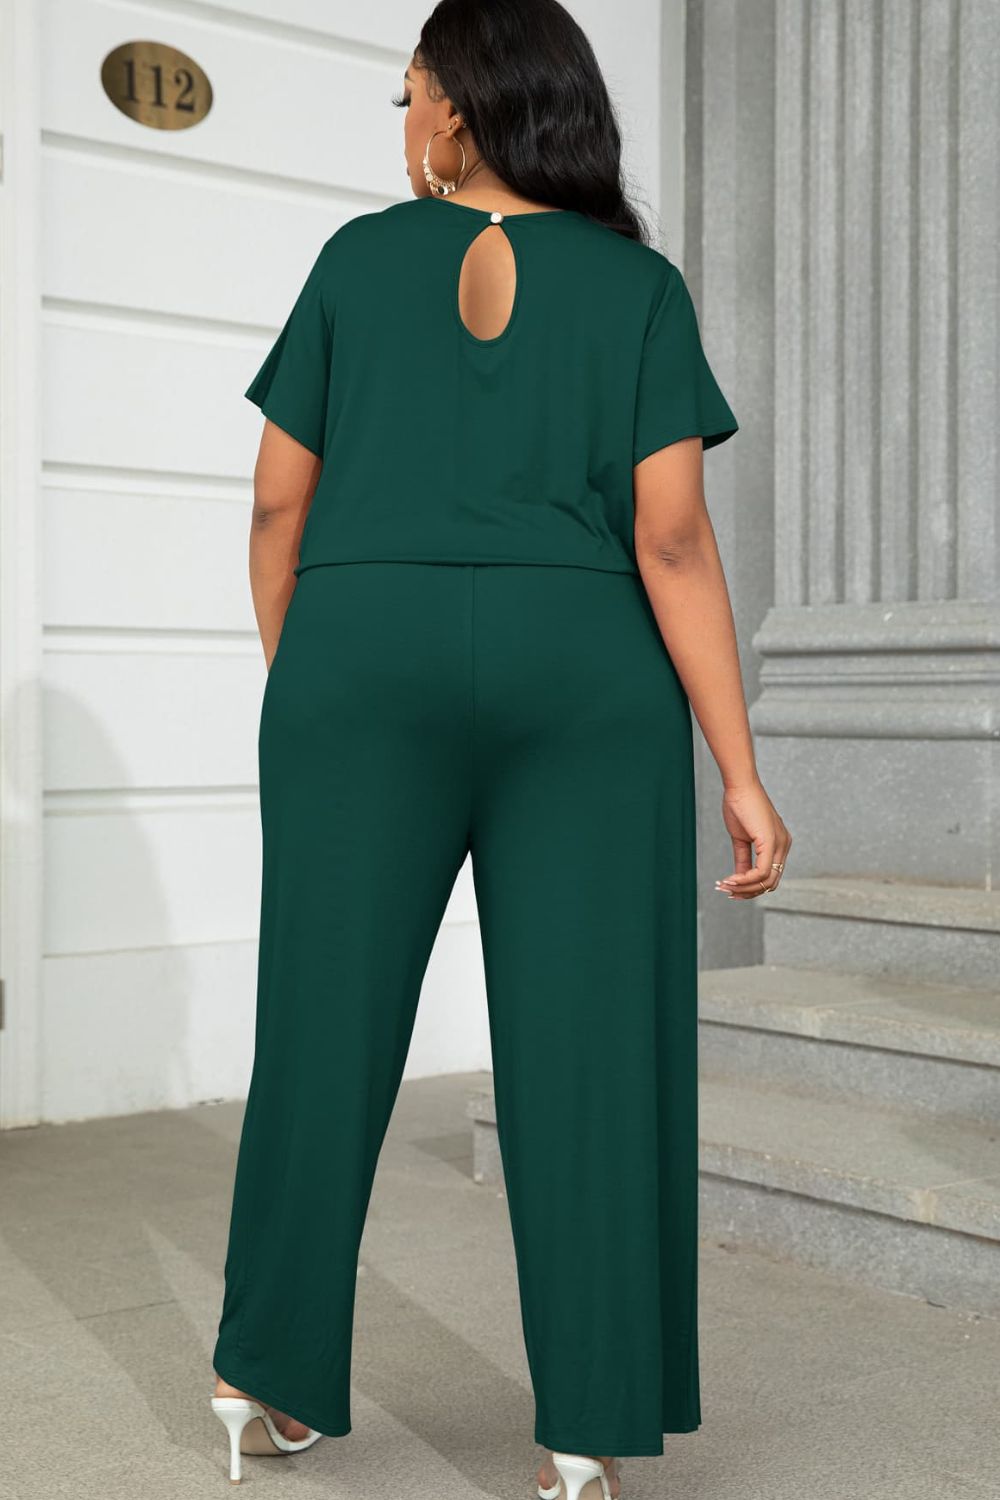 Plus Size Formal Jumpsuits with Short Sleeve and Wrap